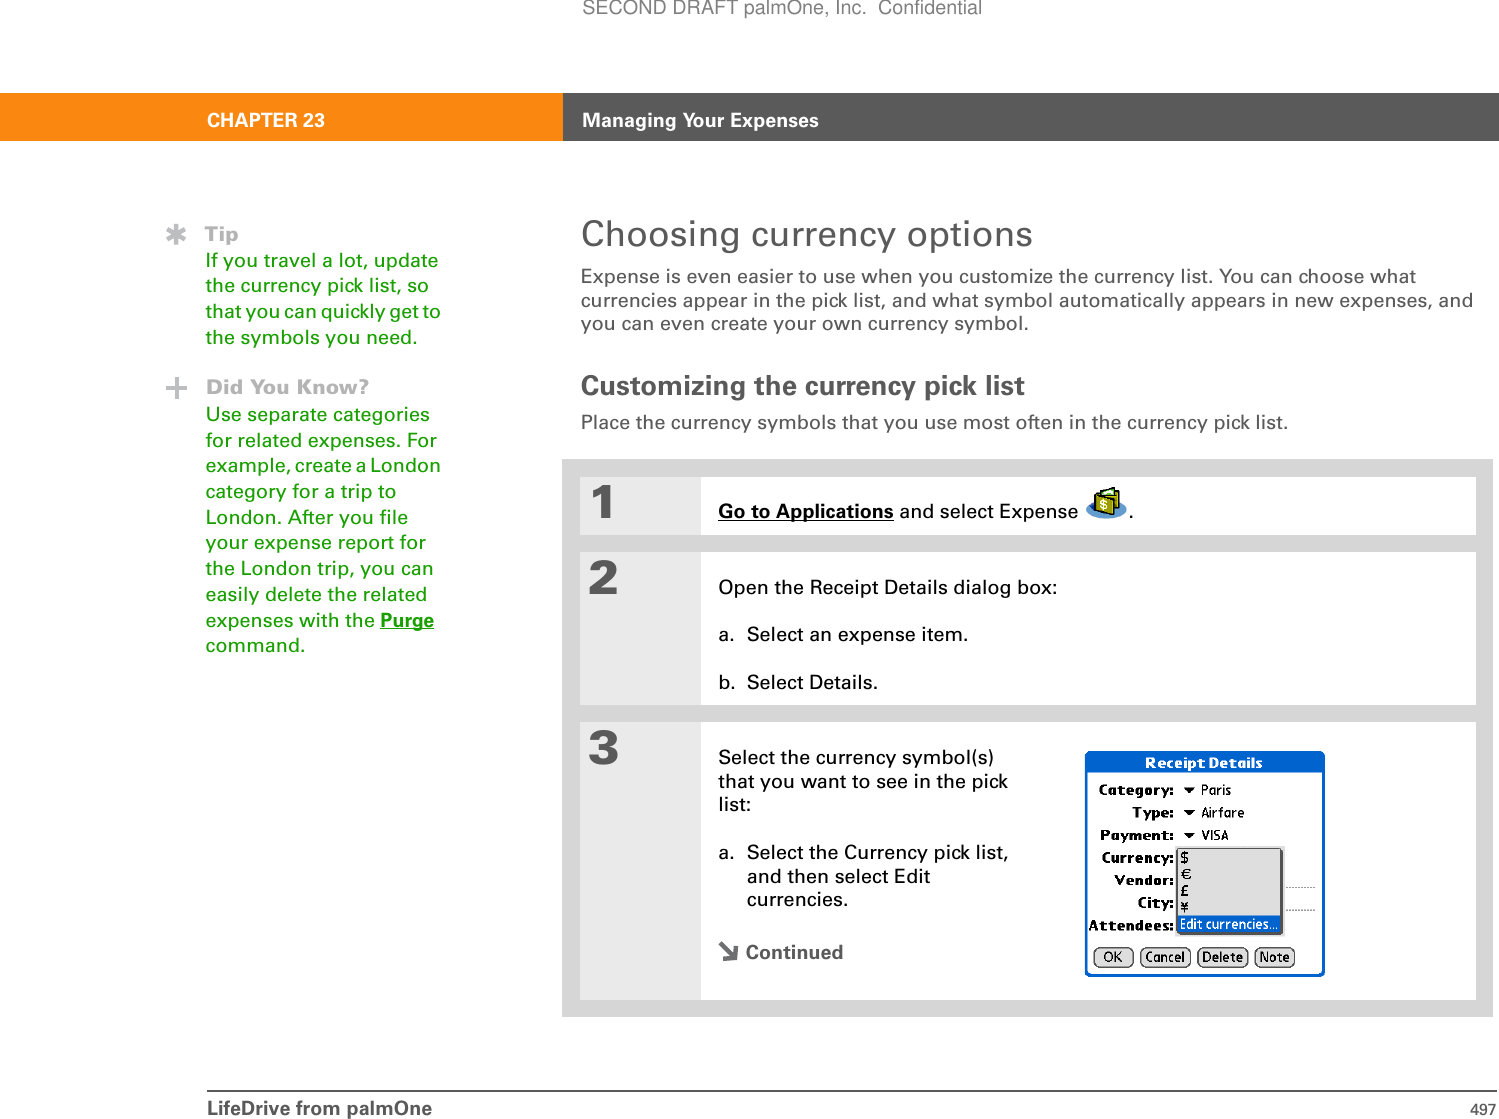 LifeDrive from palmOne 497CHAPTER 23 Managing Your ExpensesChoosing currency optionsExpense is even easier to use when you customize the currency list. You can choose what currencies appear in the pick list, and what symbol automatically appears in new expenses, and you can even create your own currency symbol.Customizing the currency pick listPlace the currency symbols that you use most often in the currency pick list.01Go to Applications and select Expense  .2Open the Receipt Details dialog box:a. Select an expense item.b. Select Details.3Select the currency symbol(s) that you want to see in the pick list:a. Select the Currency pick list, and then select Edit currencies.ContinuedTipIf you travel a lot, update the currency pick list, so that you can quickly get to the symbols you need.Did You Know?Use separate categories for related expenses. For example, create a London category for a trip to London. After you file your expense report for the London trip, you can easily delete the related expenses with the Purgecommand.SECOND DRAFT palmOne, Inc.  Confidential